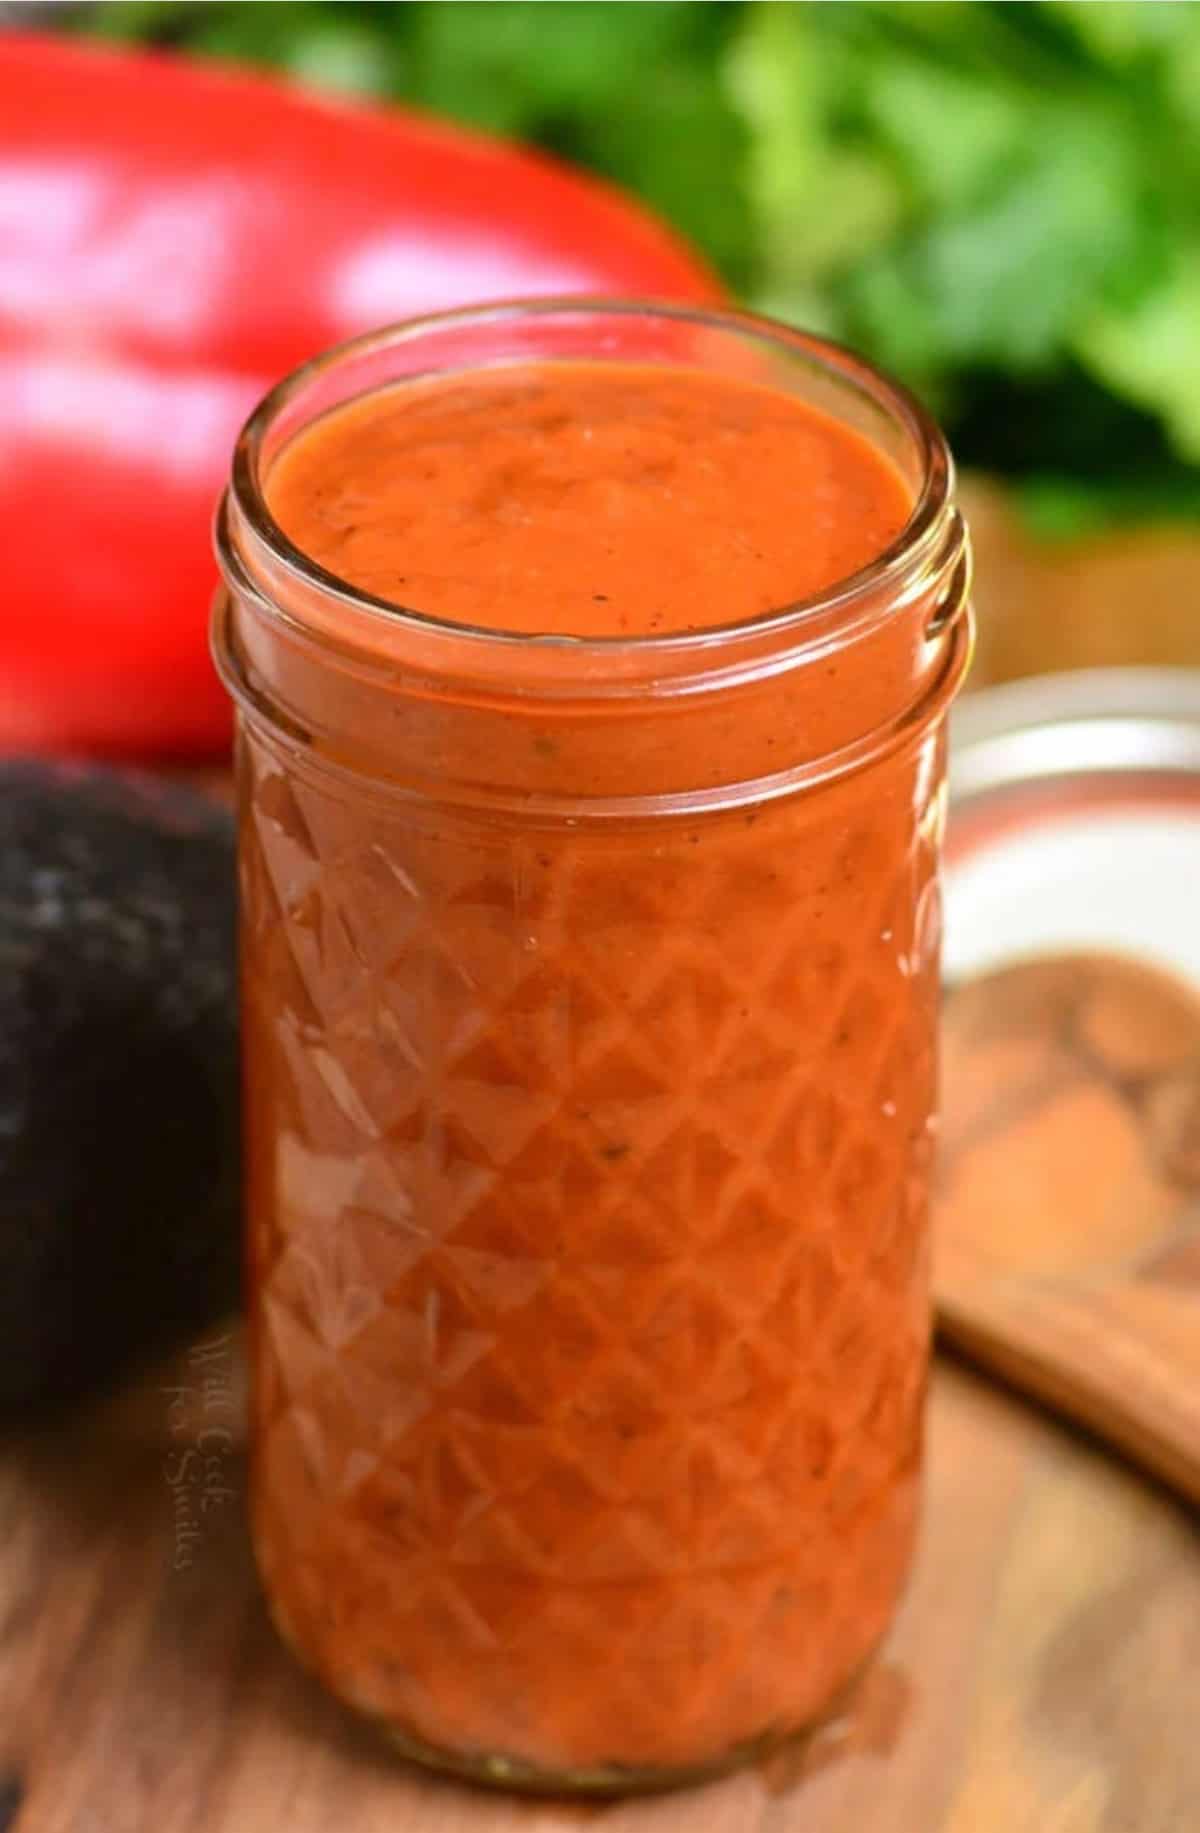 tall glass jar full of enchilada sauce on wooden surface with veggies around.